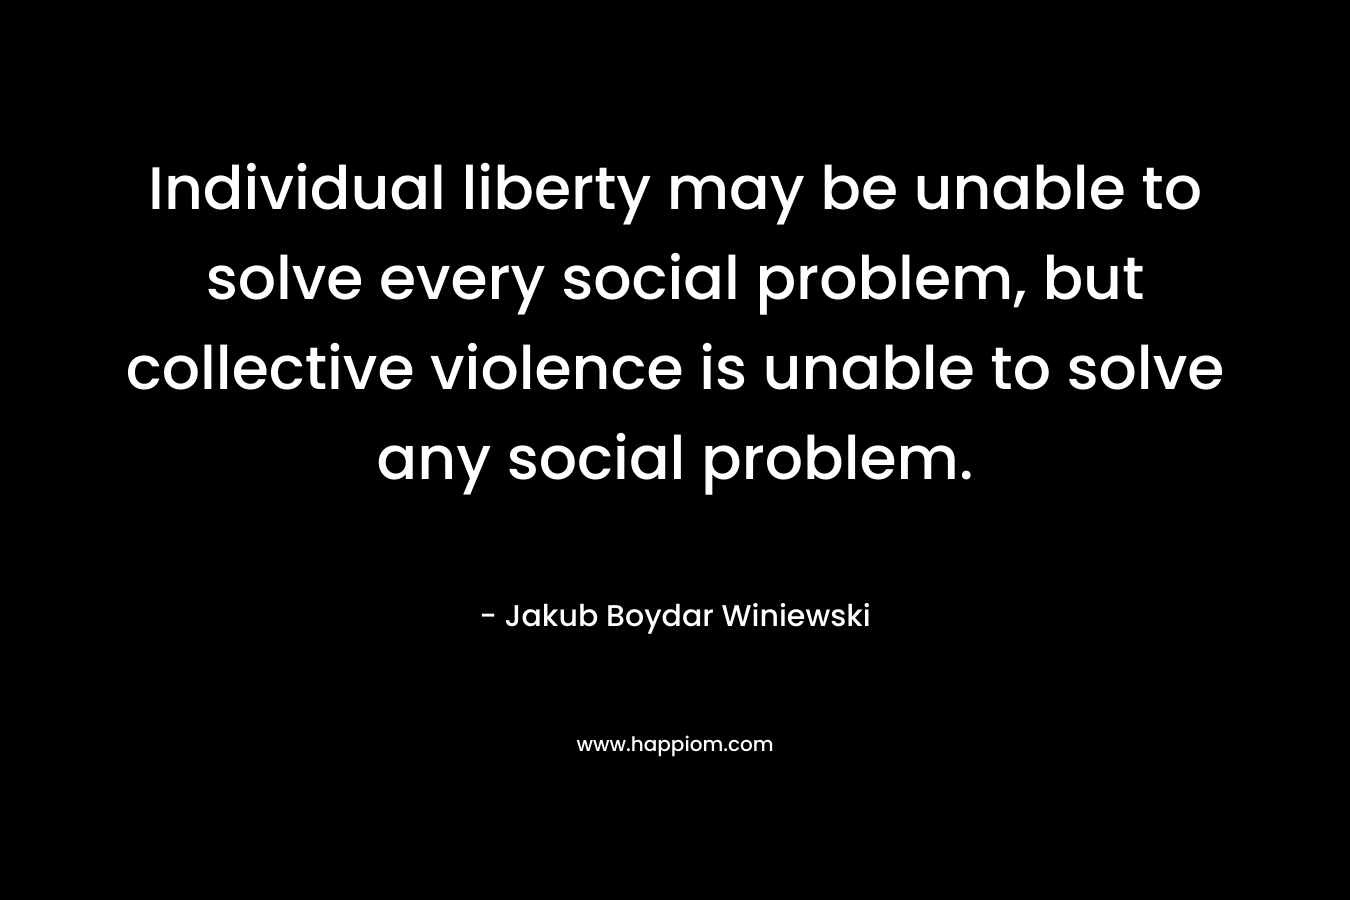 Individual liberty may be unable to solve every social problem, but collective violence is unable to solve any social problem.